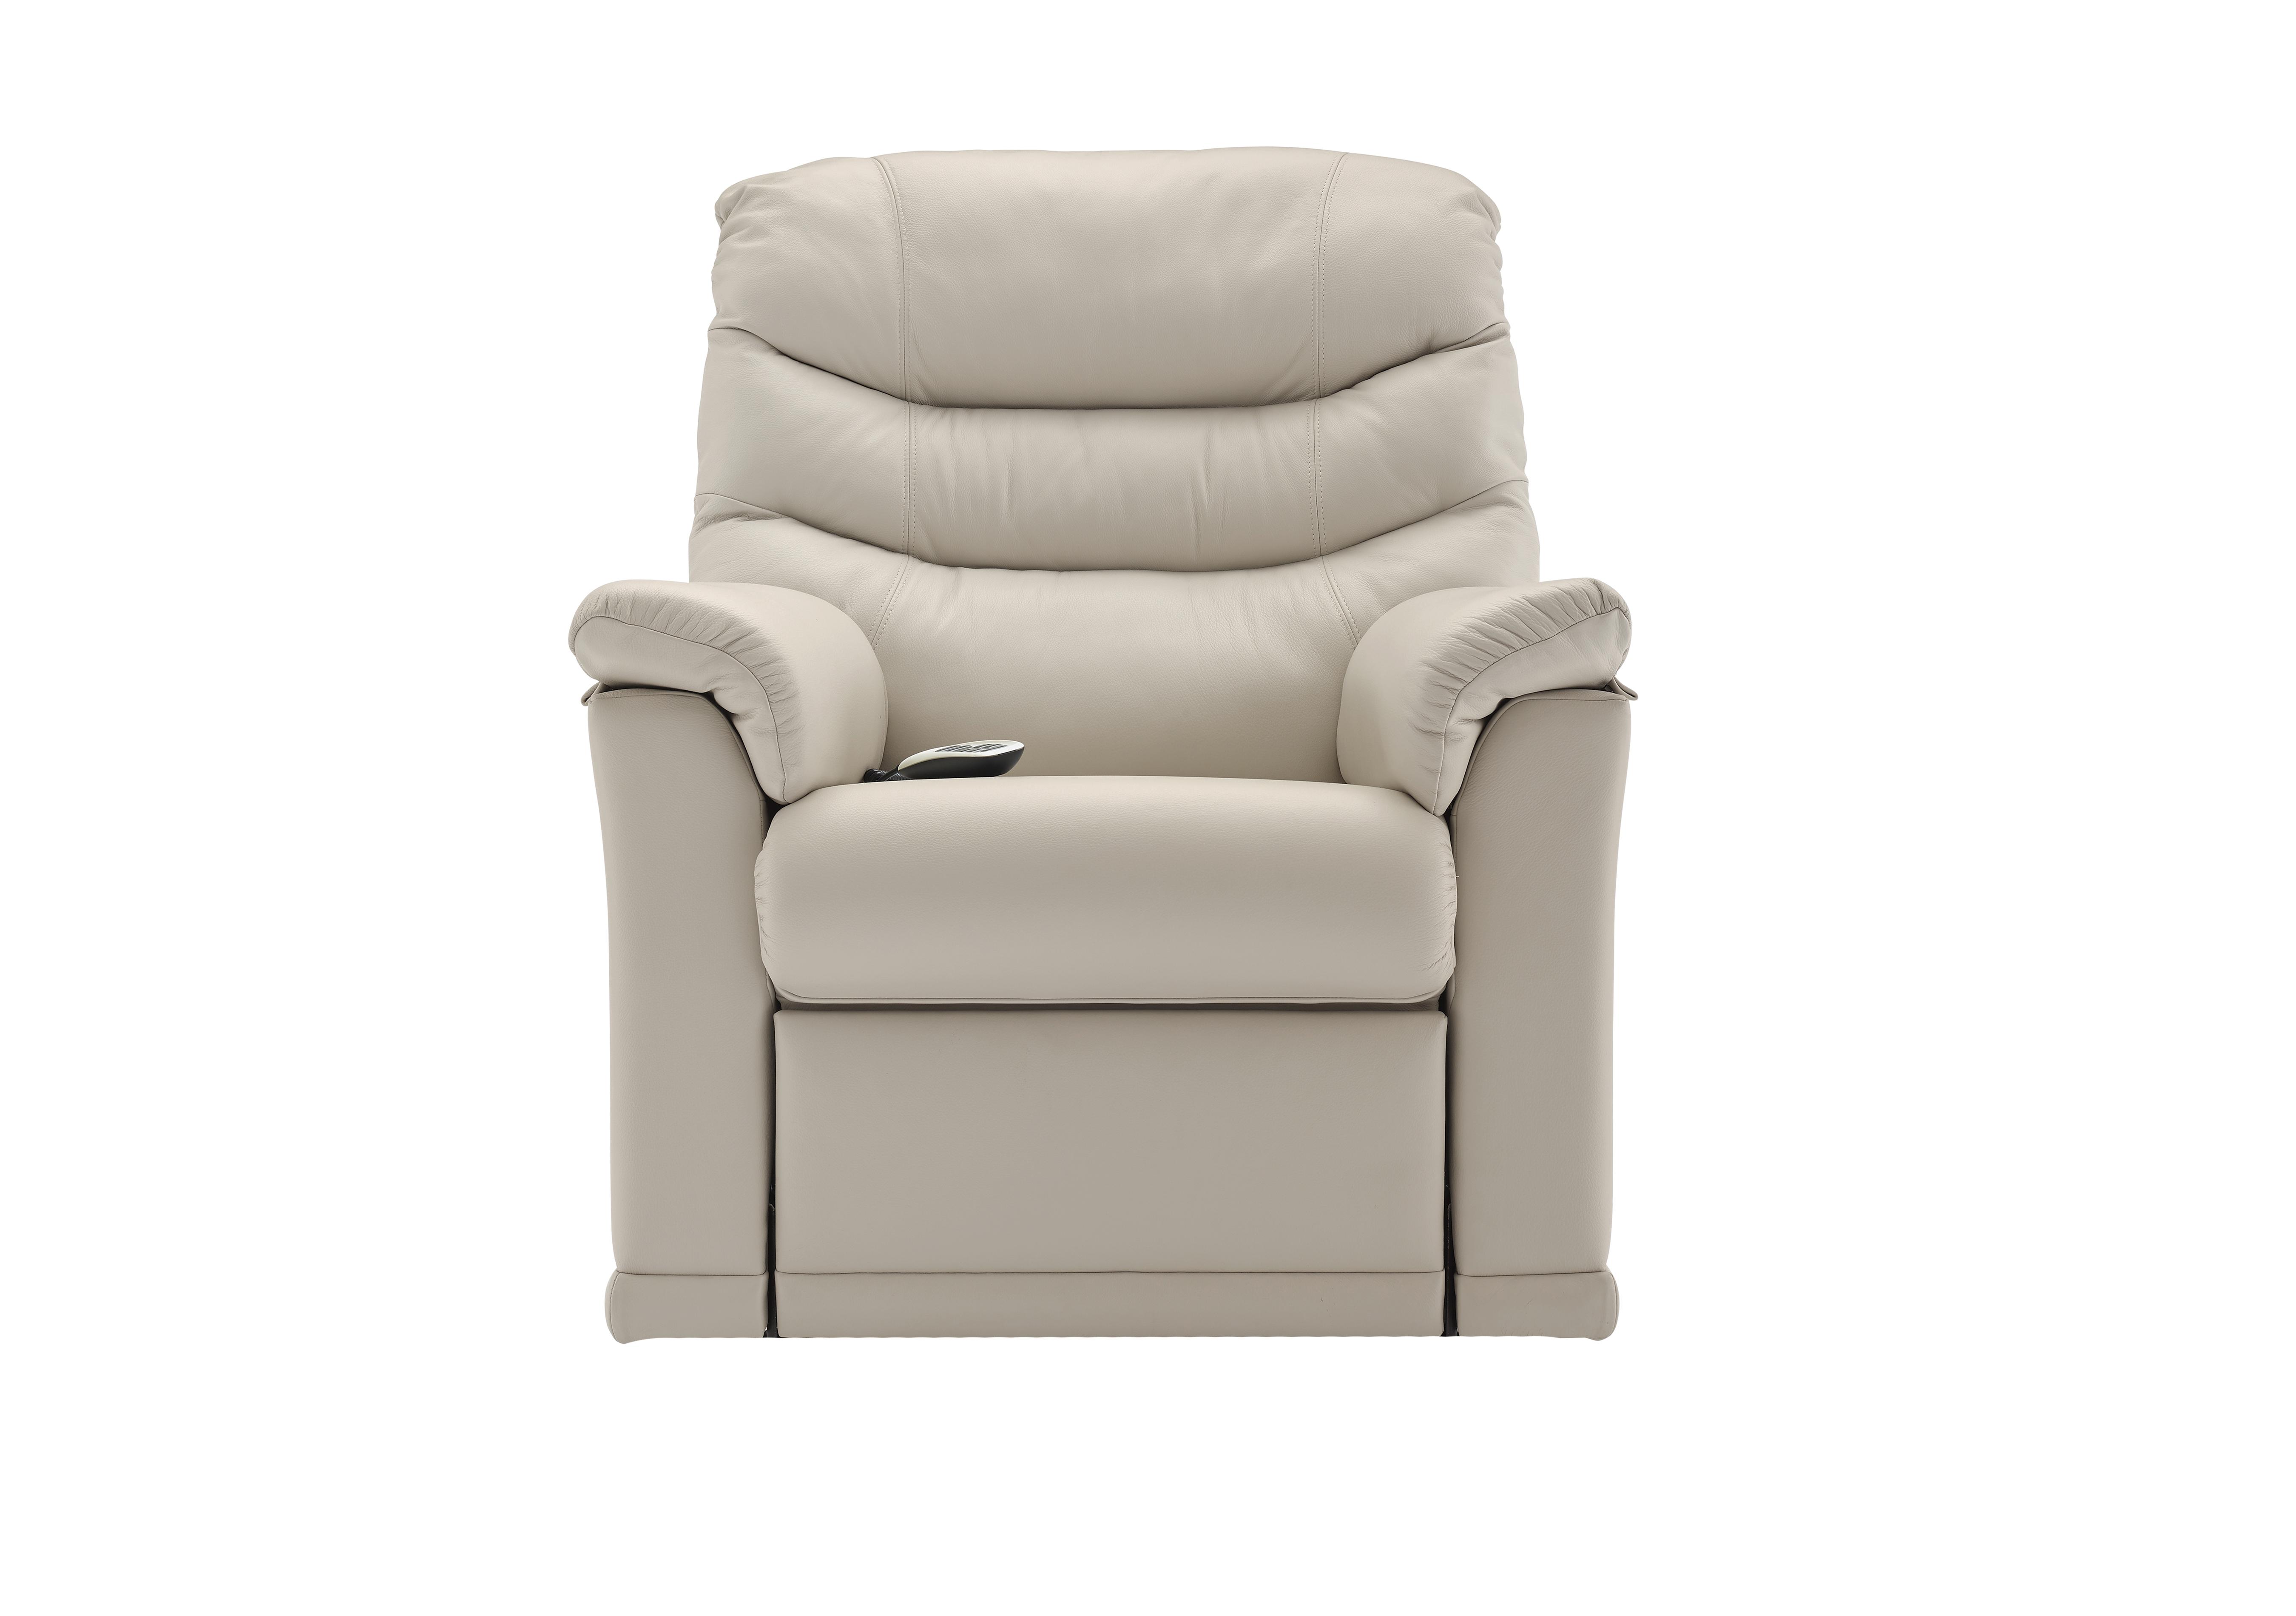 Malvern Leather Rise and Recliner Armchair in P219 Capri Putty on Furniture Village